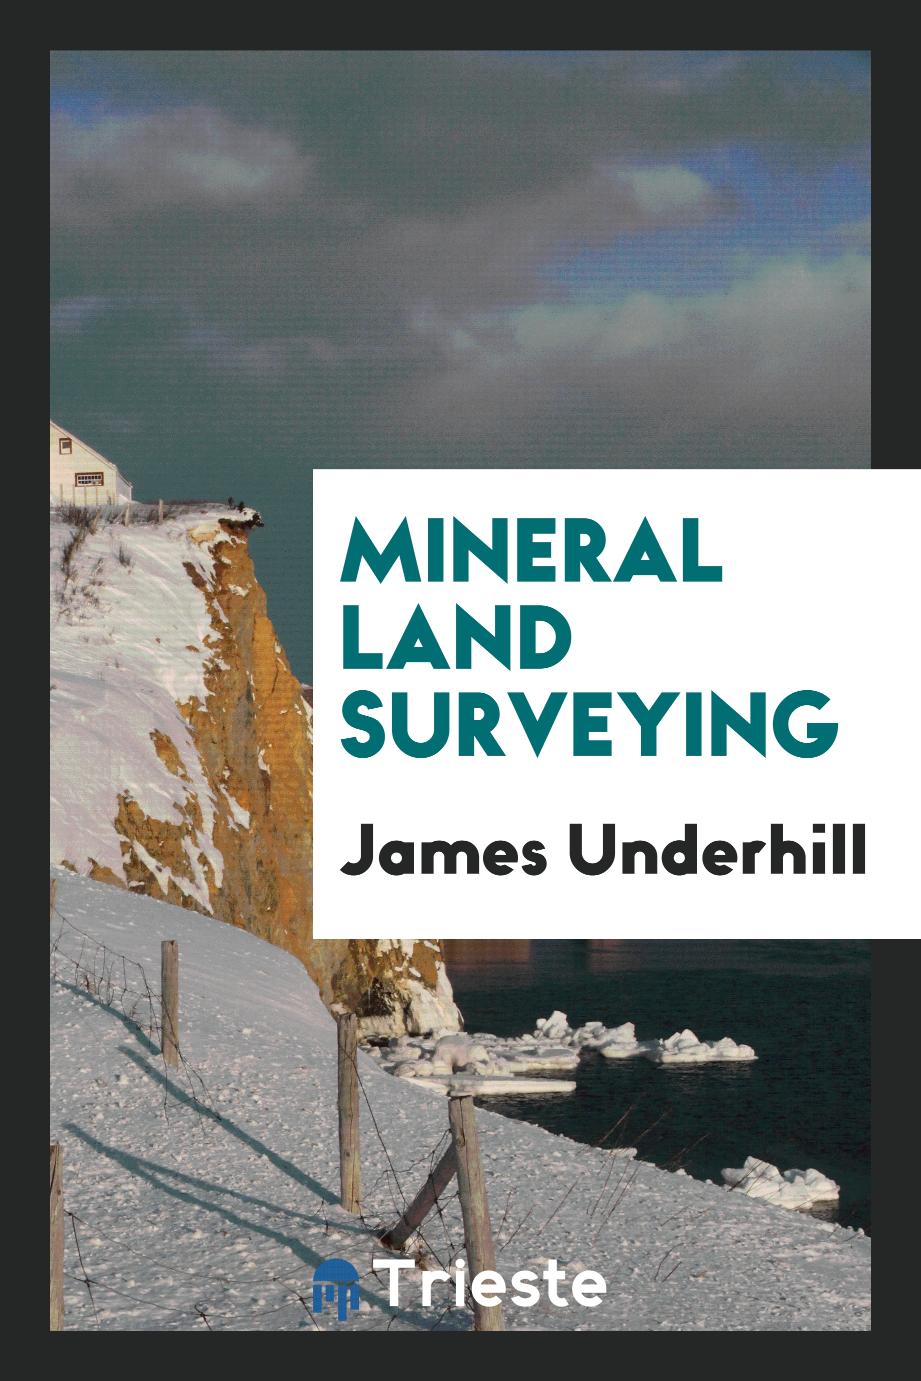 Mineral land surveying